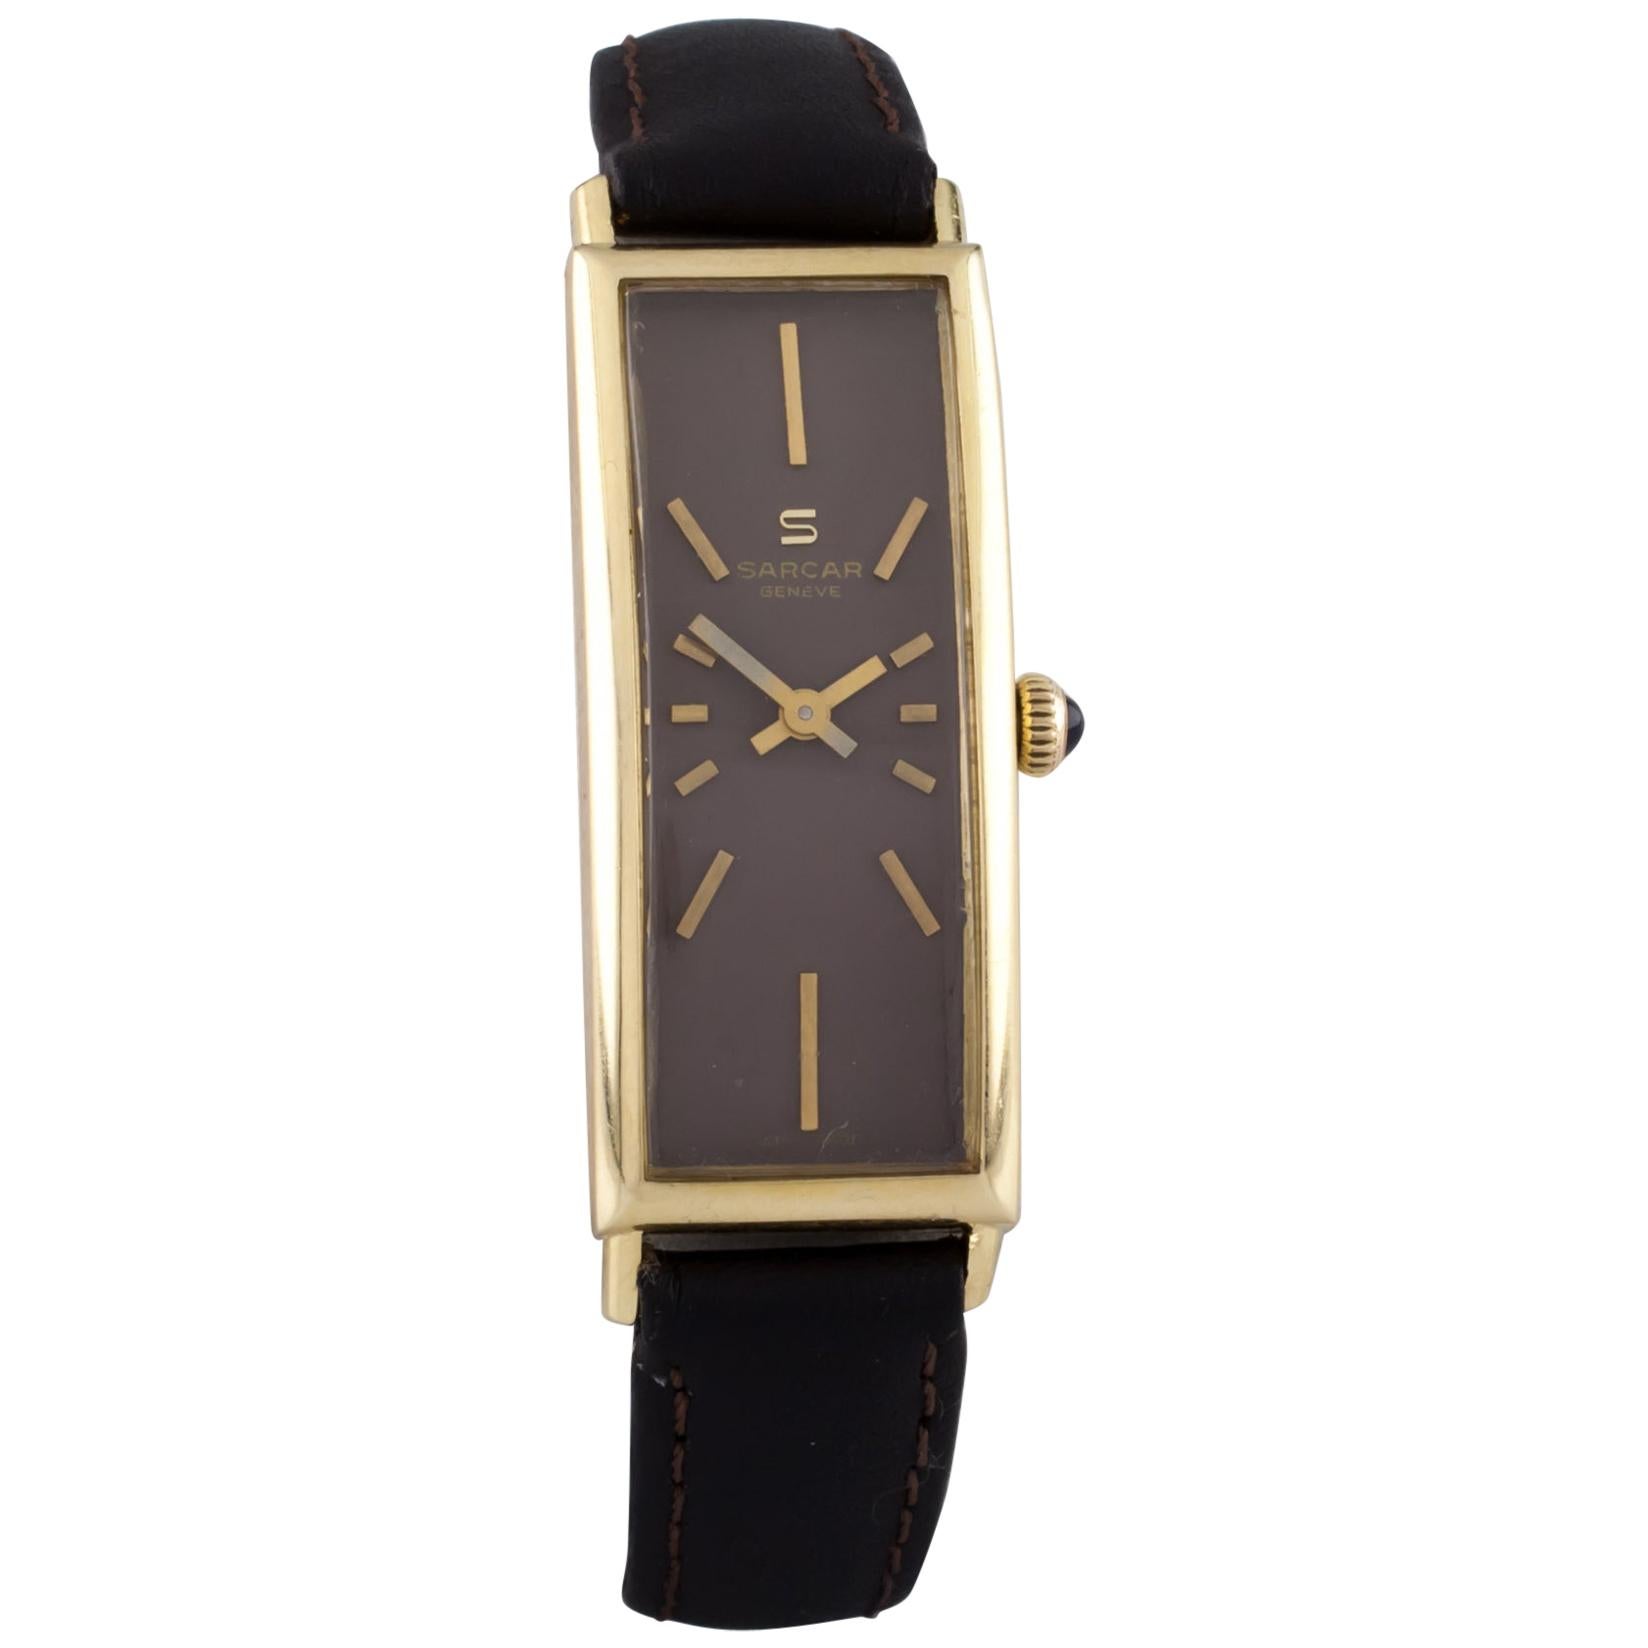 Sarcar 18 Karat Yellow Gold Hand-Winding Women's Dress Watch with Leather Band